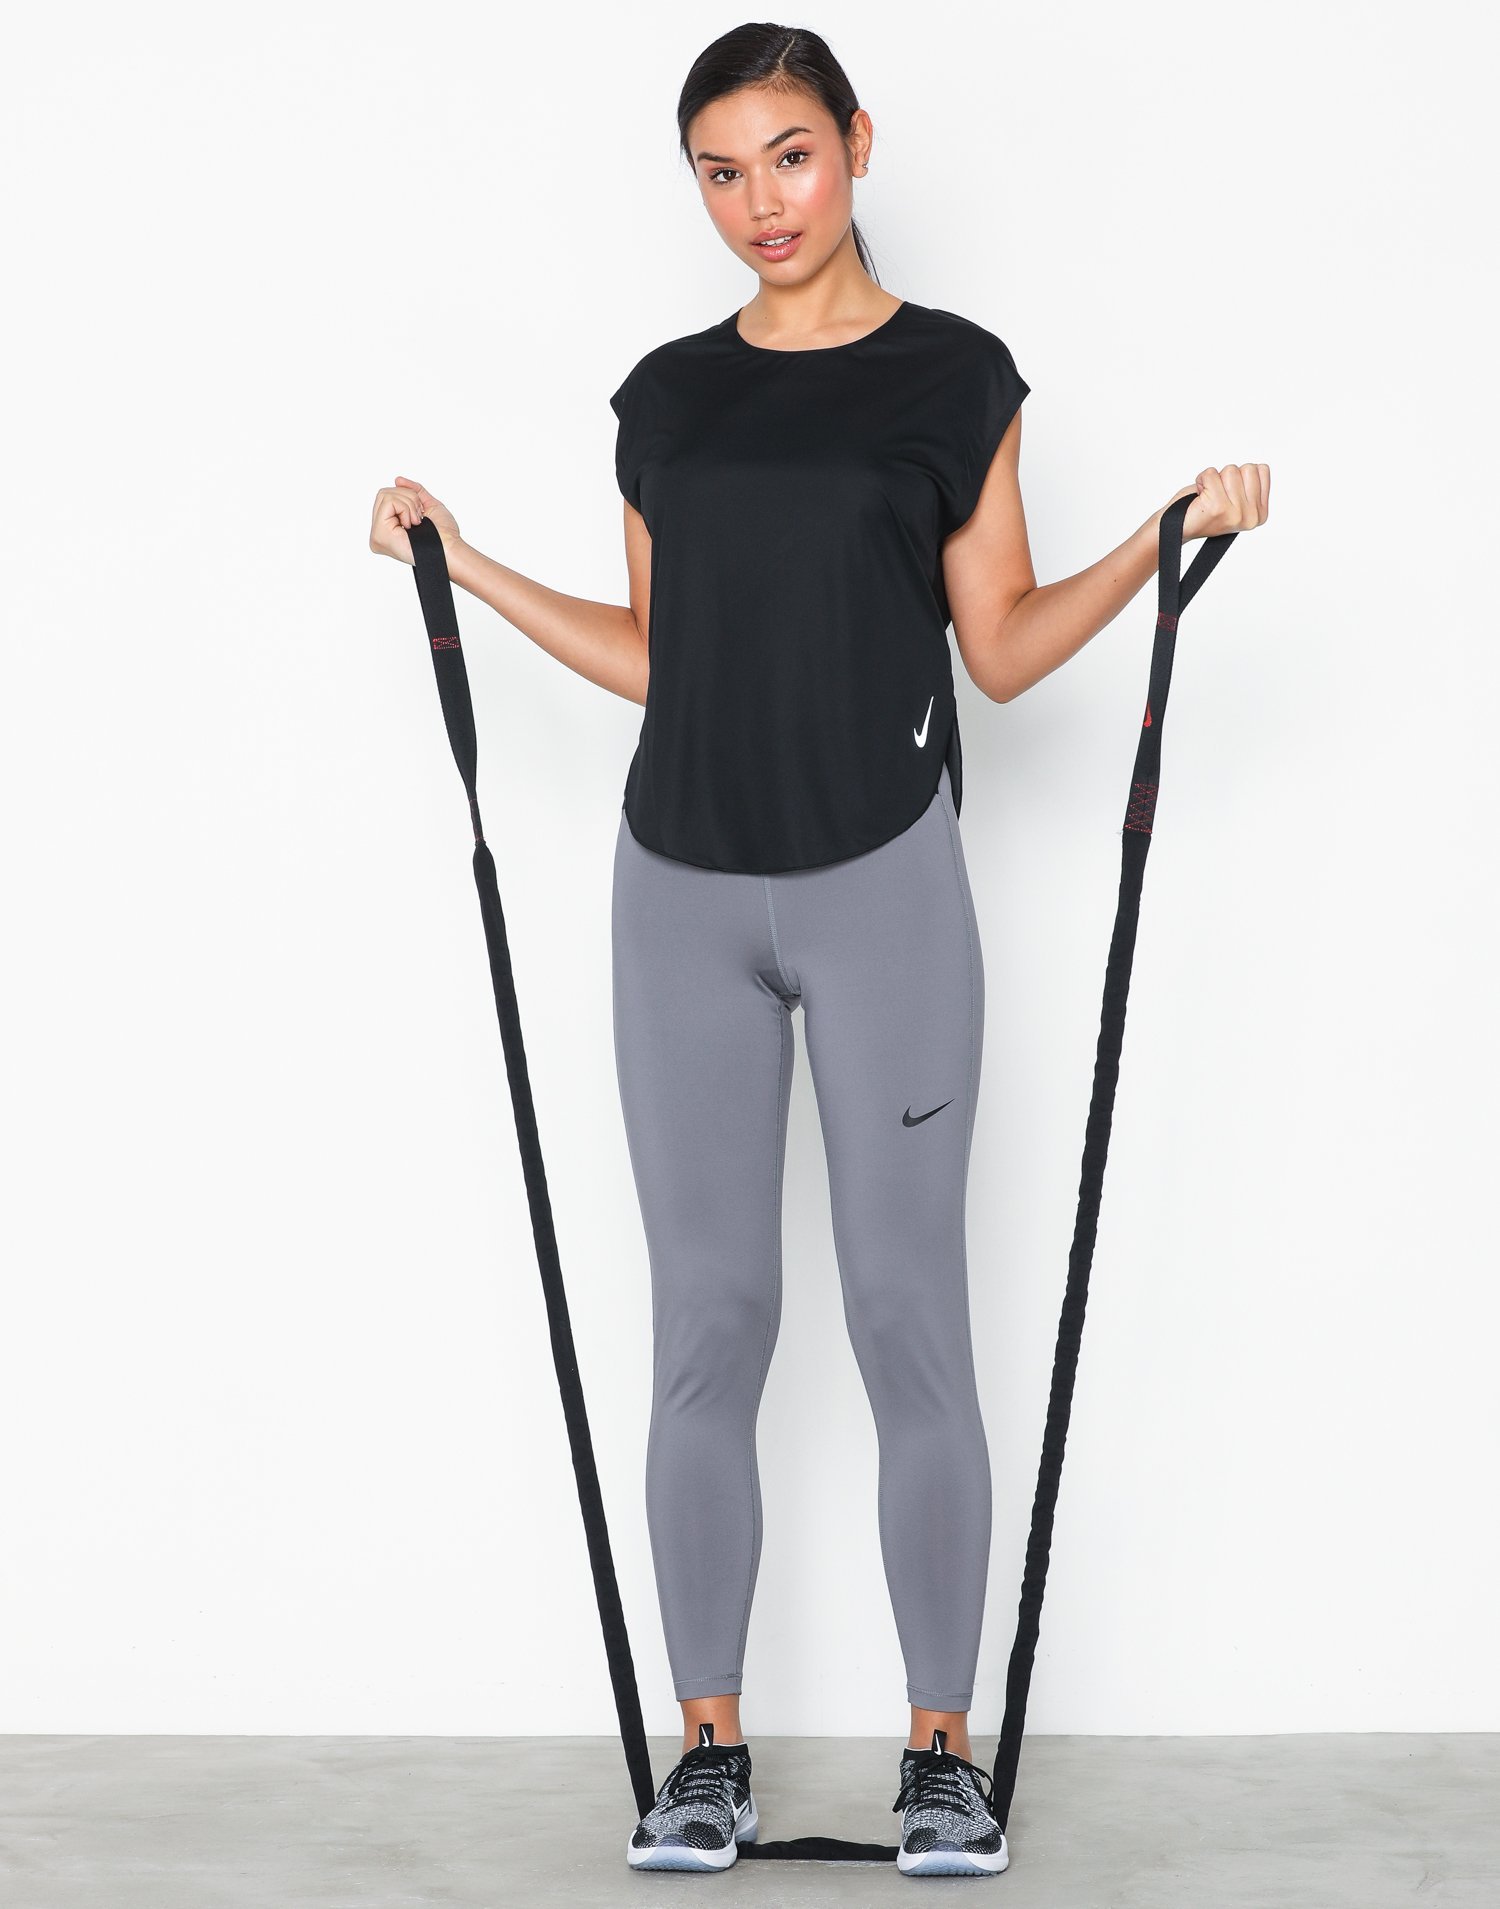 nike exercise bands